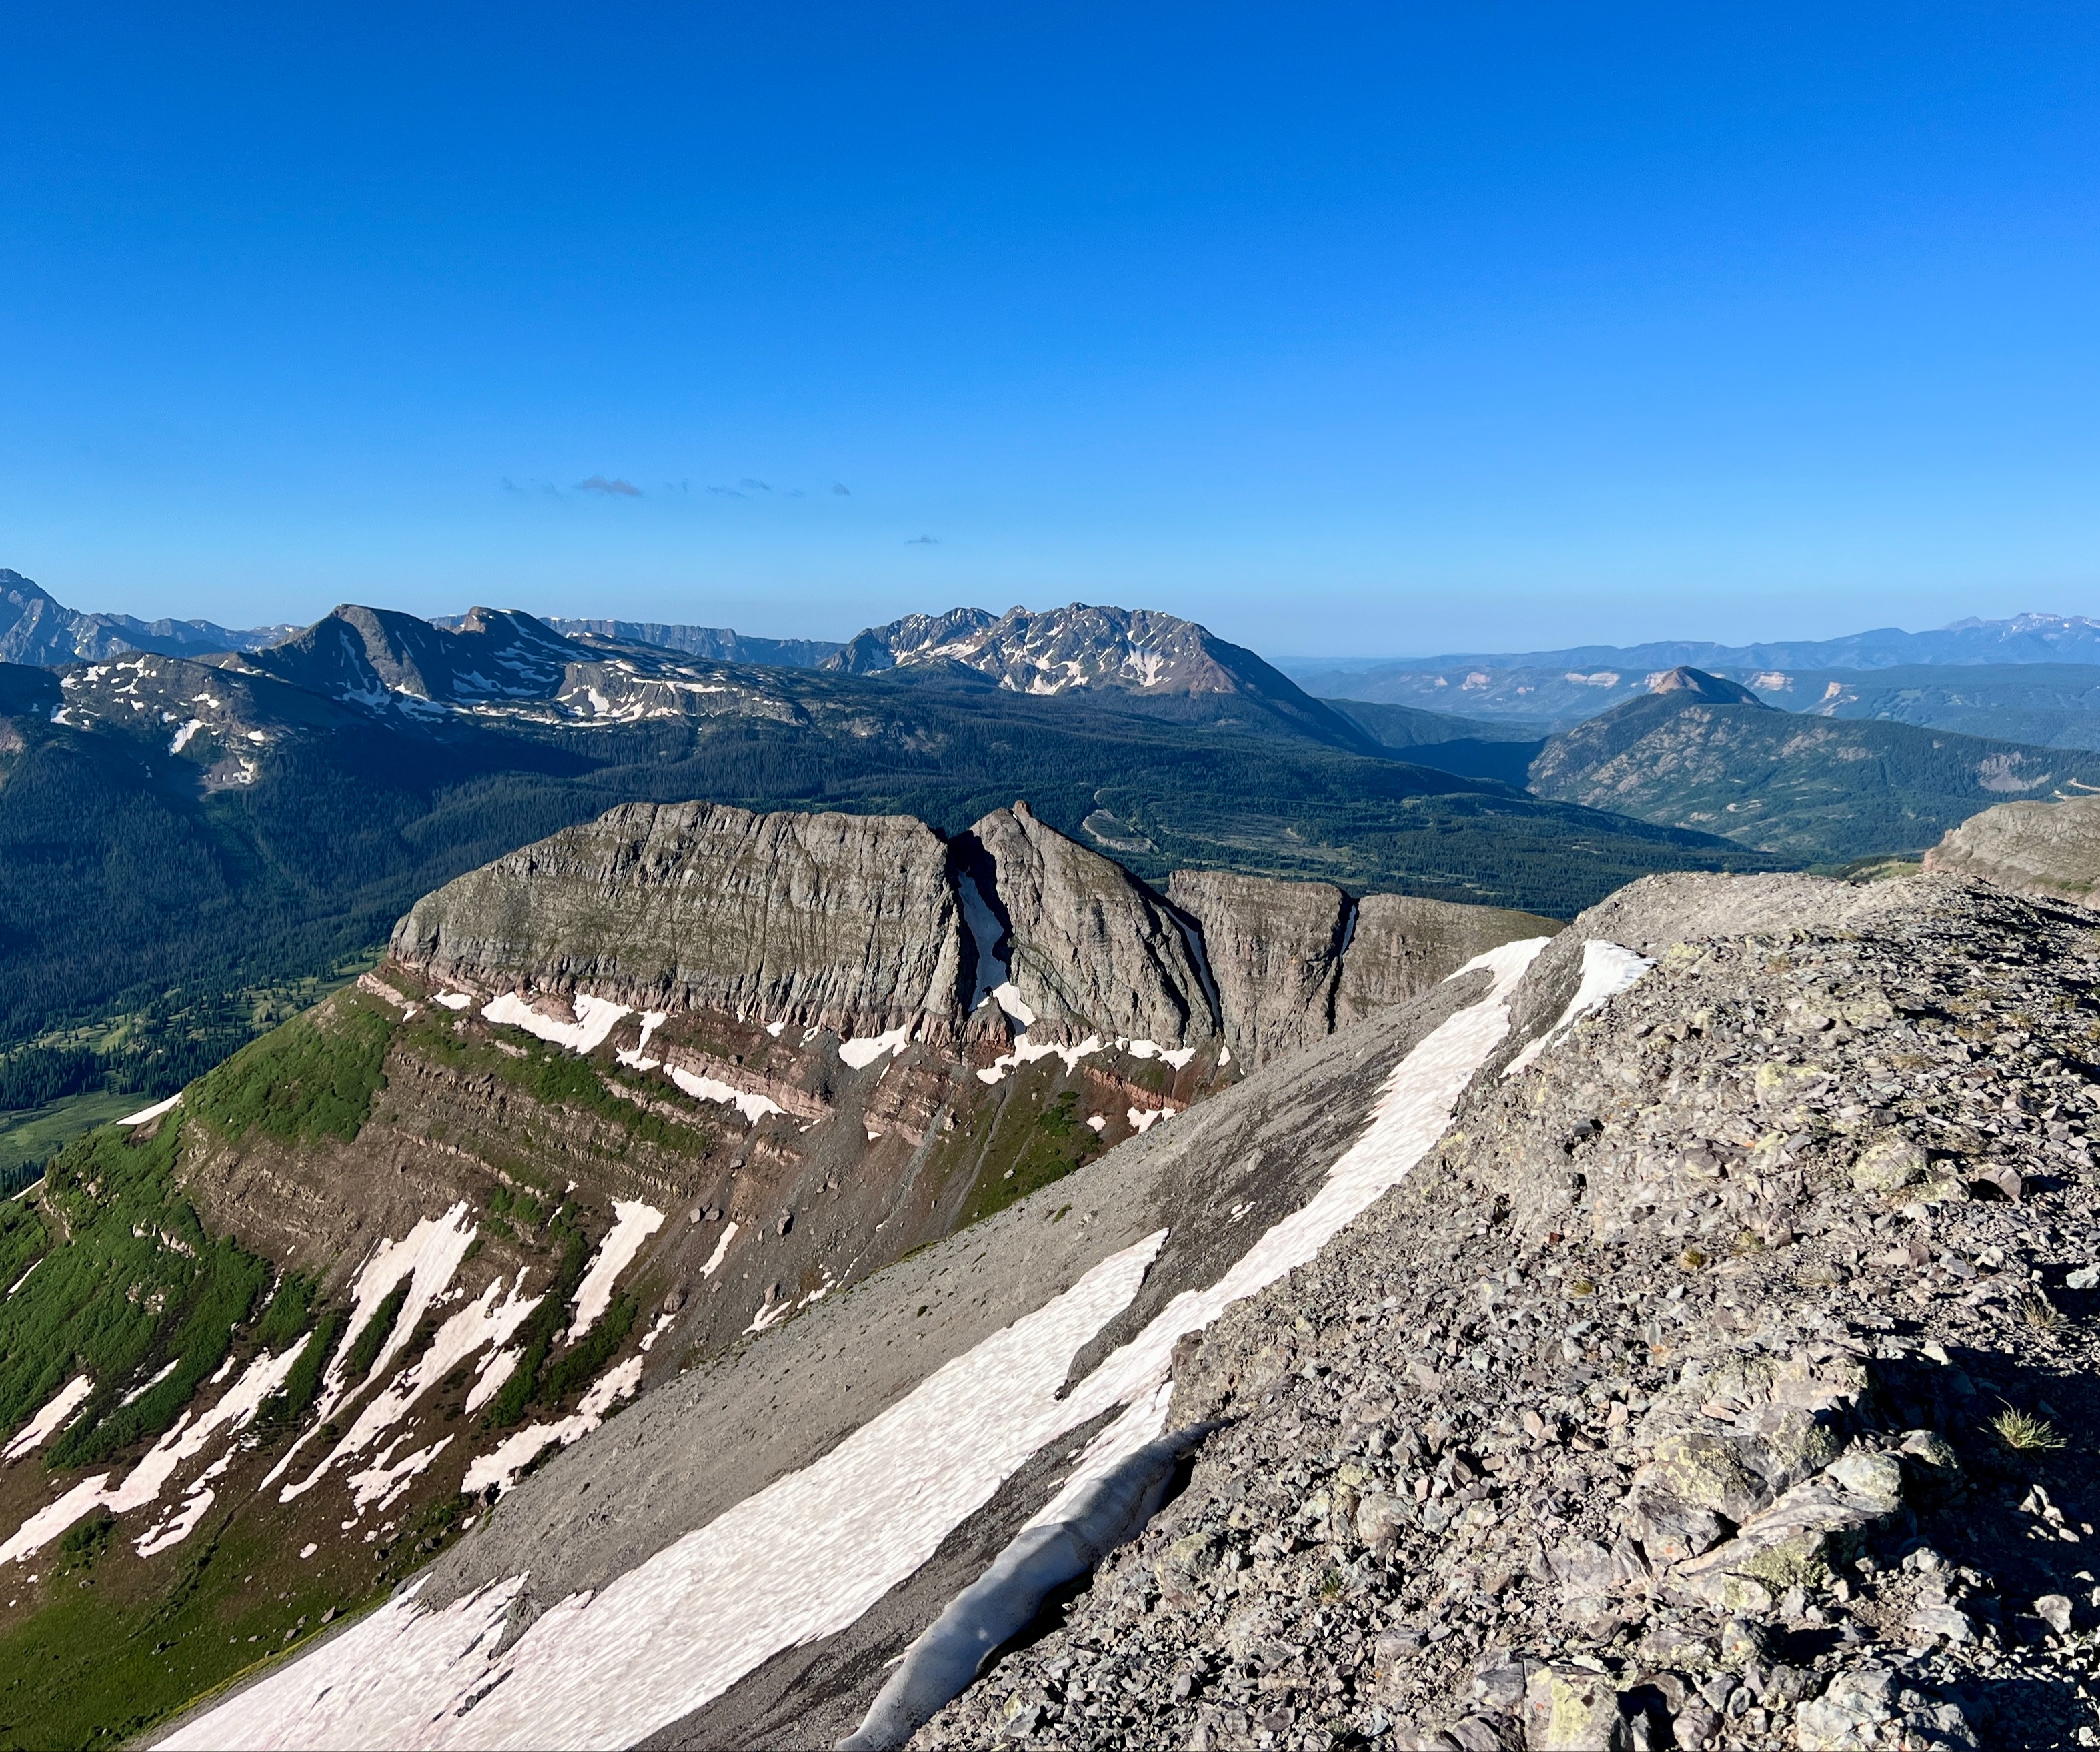 View from the top of Spencer Peak. Photo: Greg Heil